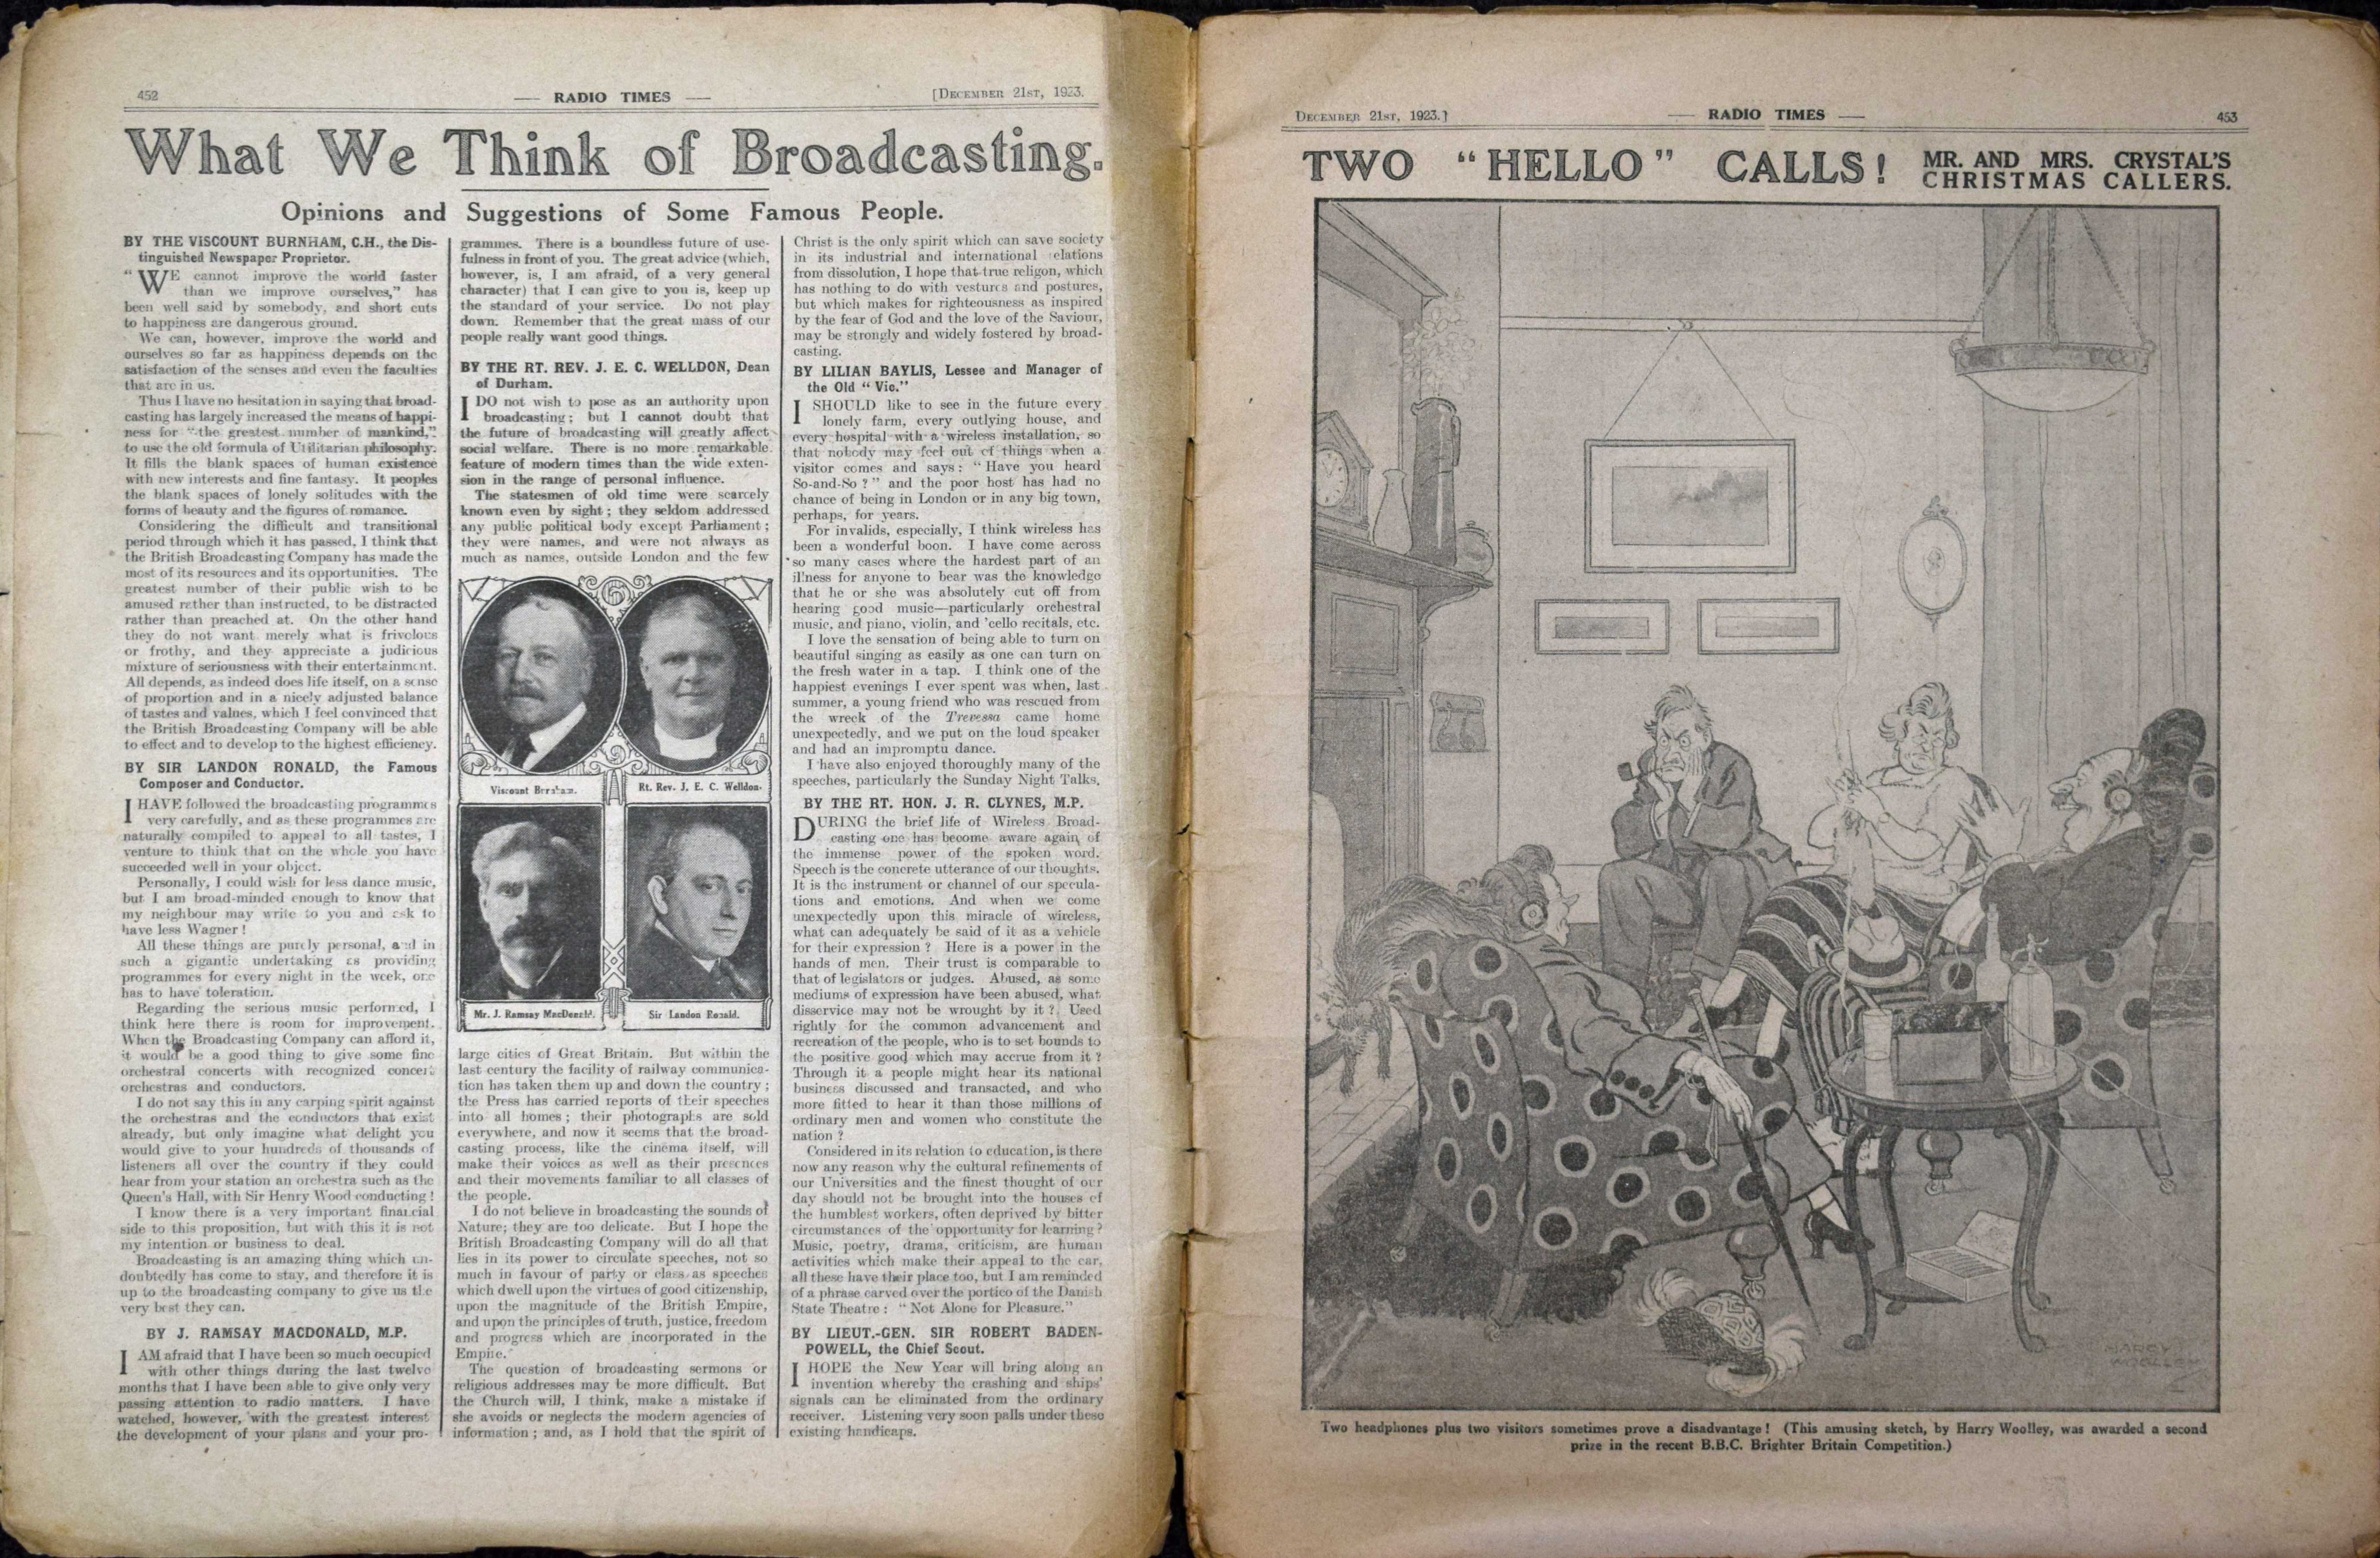 The Radio Times. The Official Organ of the B.B.C. Vol. I. No. 13. December 21, 1923.